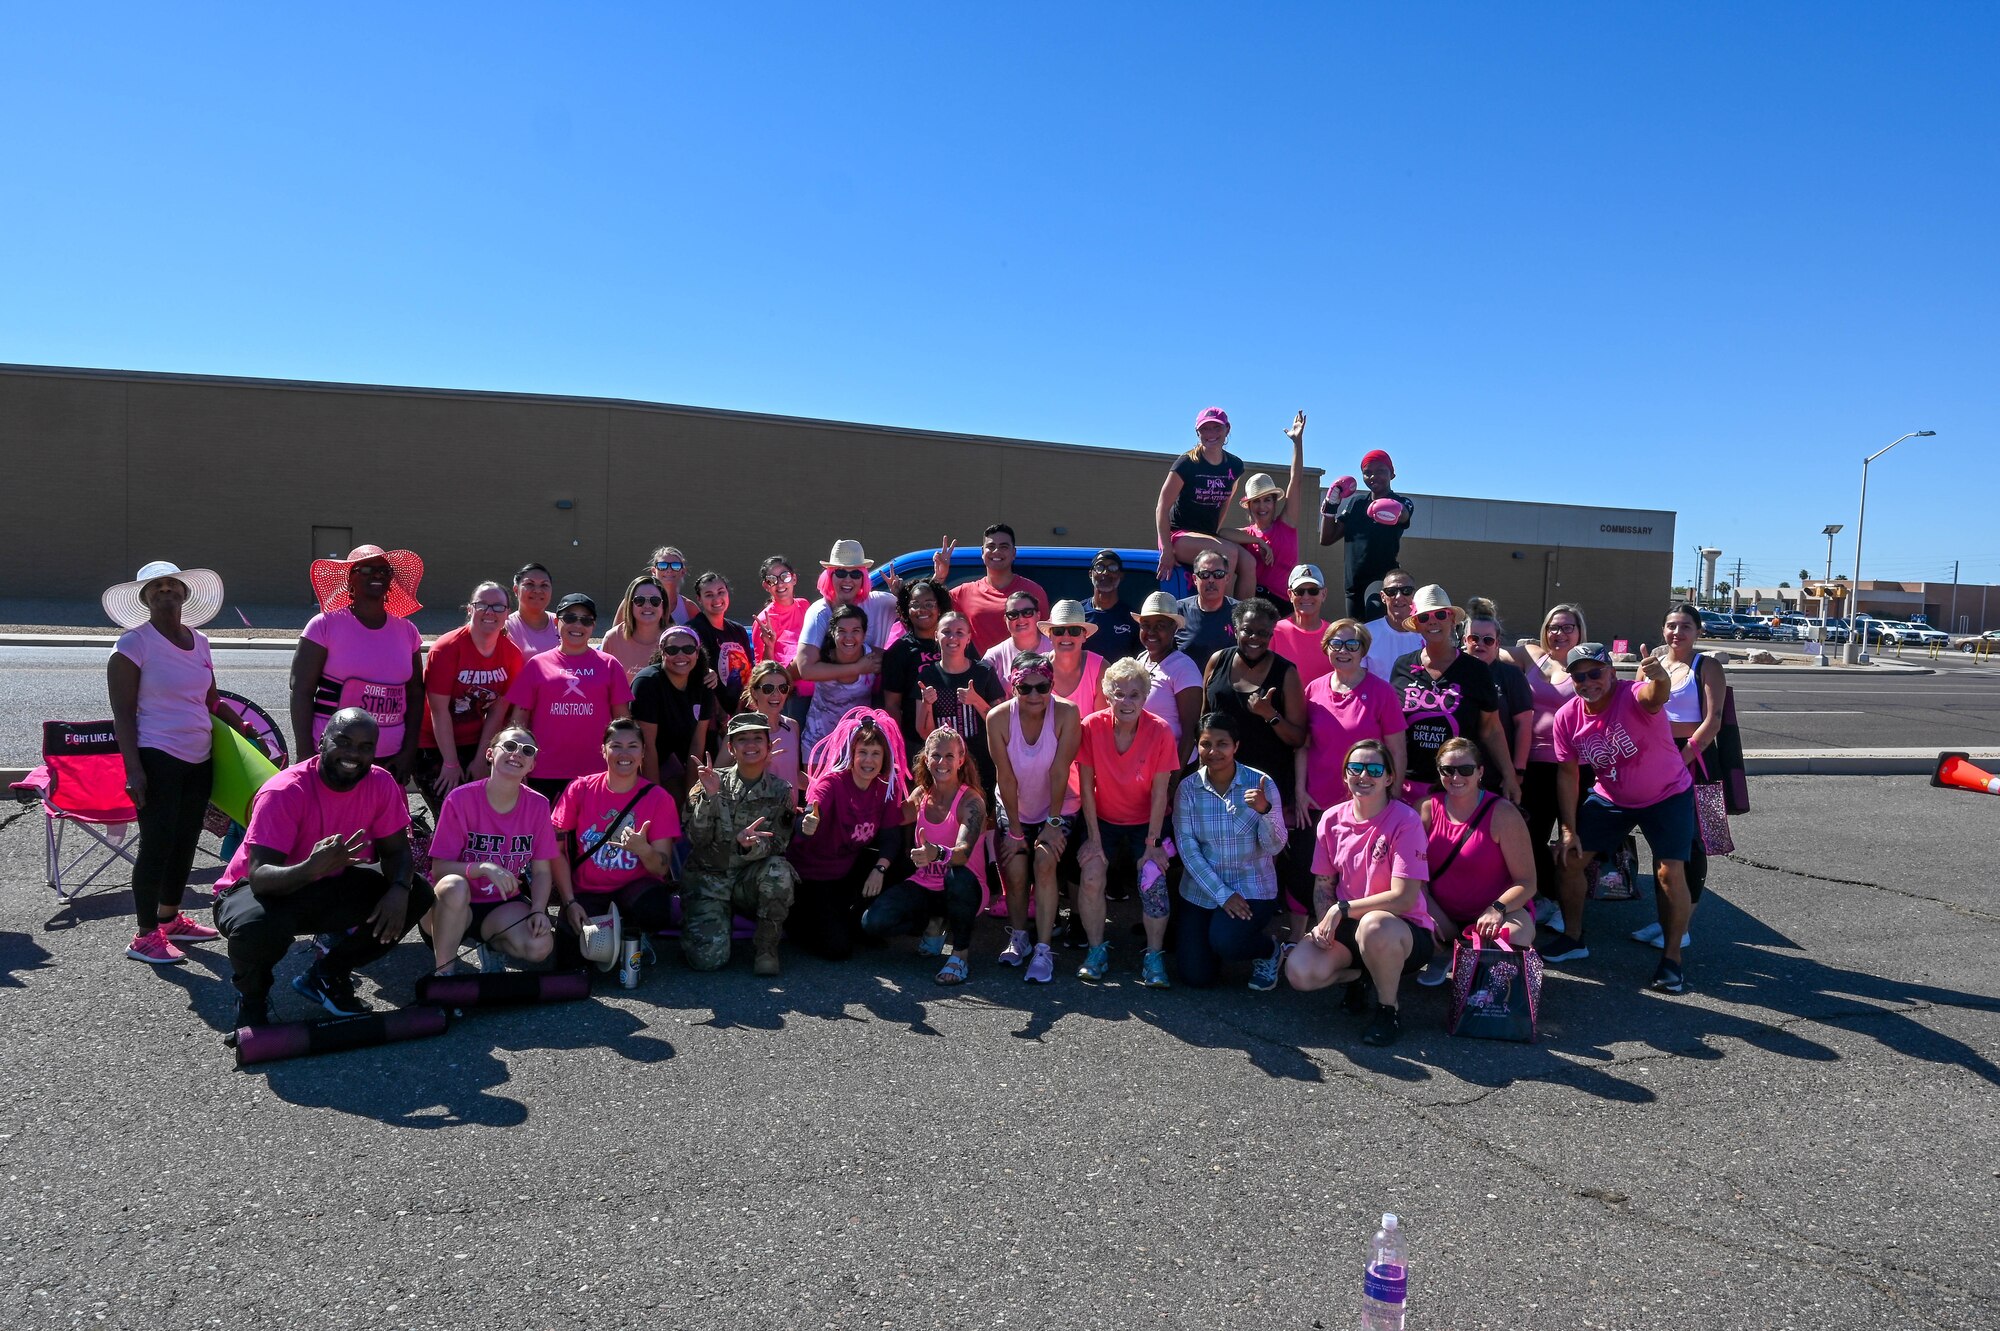 Members of the Luke Air Force Base community participate in a breast cancer awareness event Oct. 5, 2022, at Luke Air Force Base, Arizona.